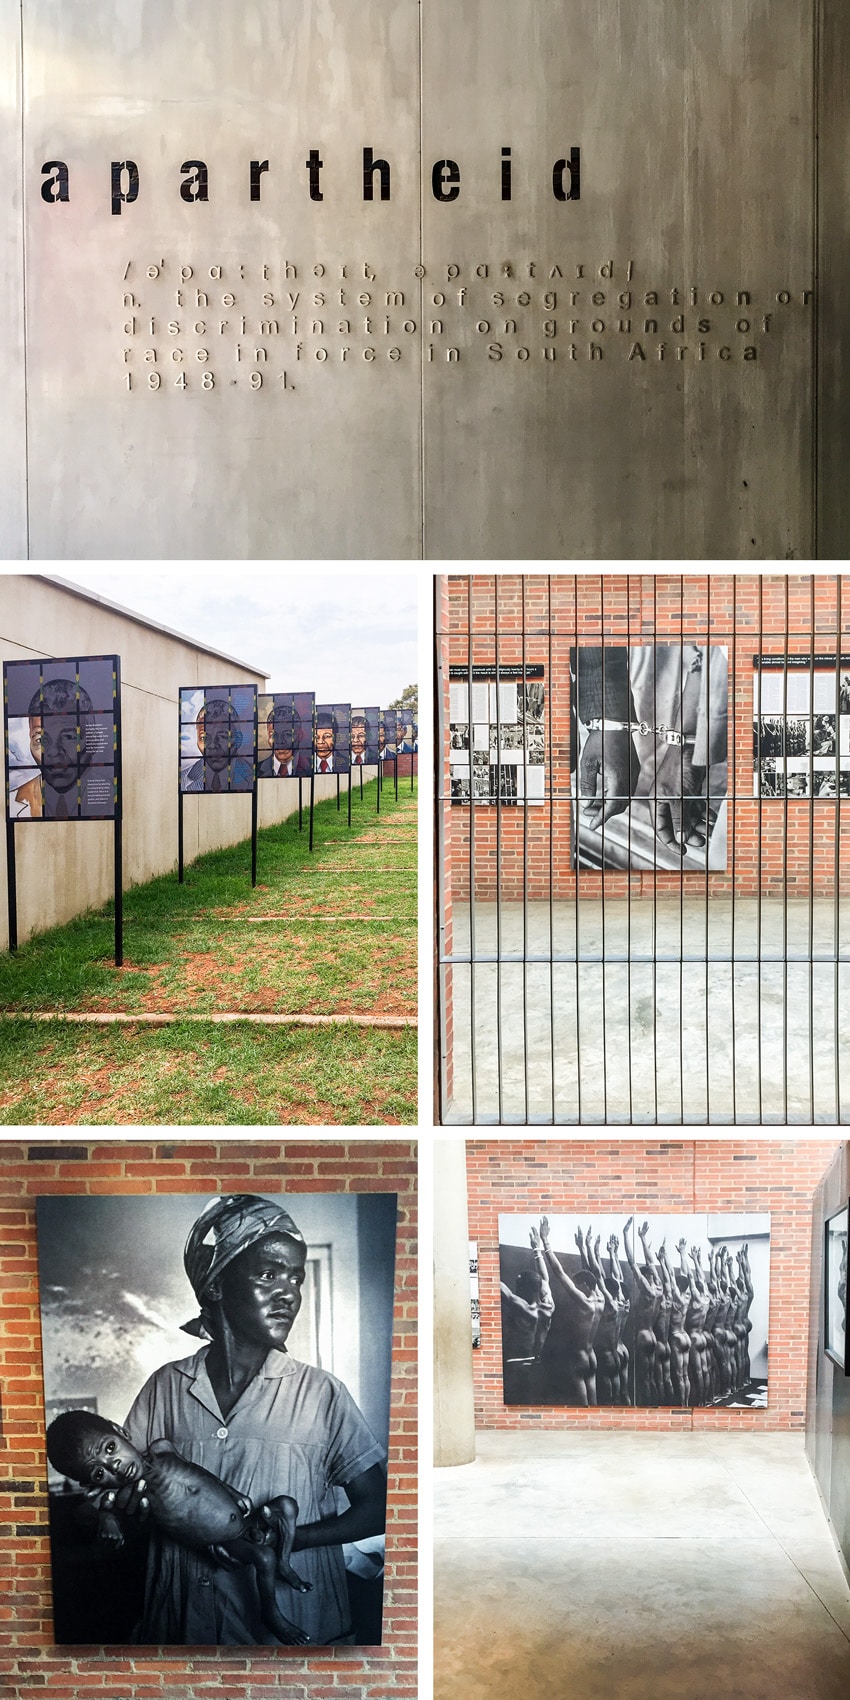 What Everyone Needs to Know About the Apartheid Museum